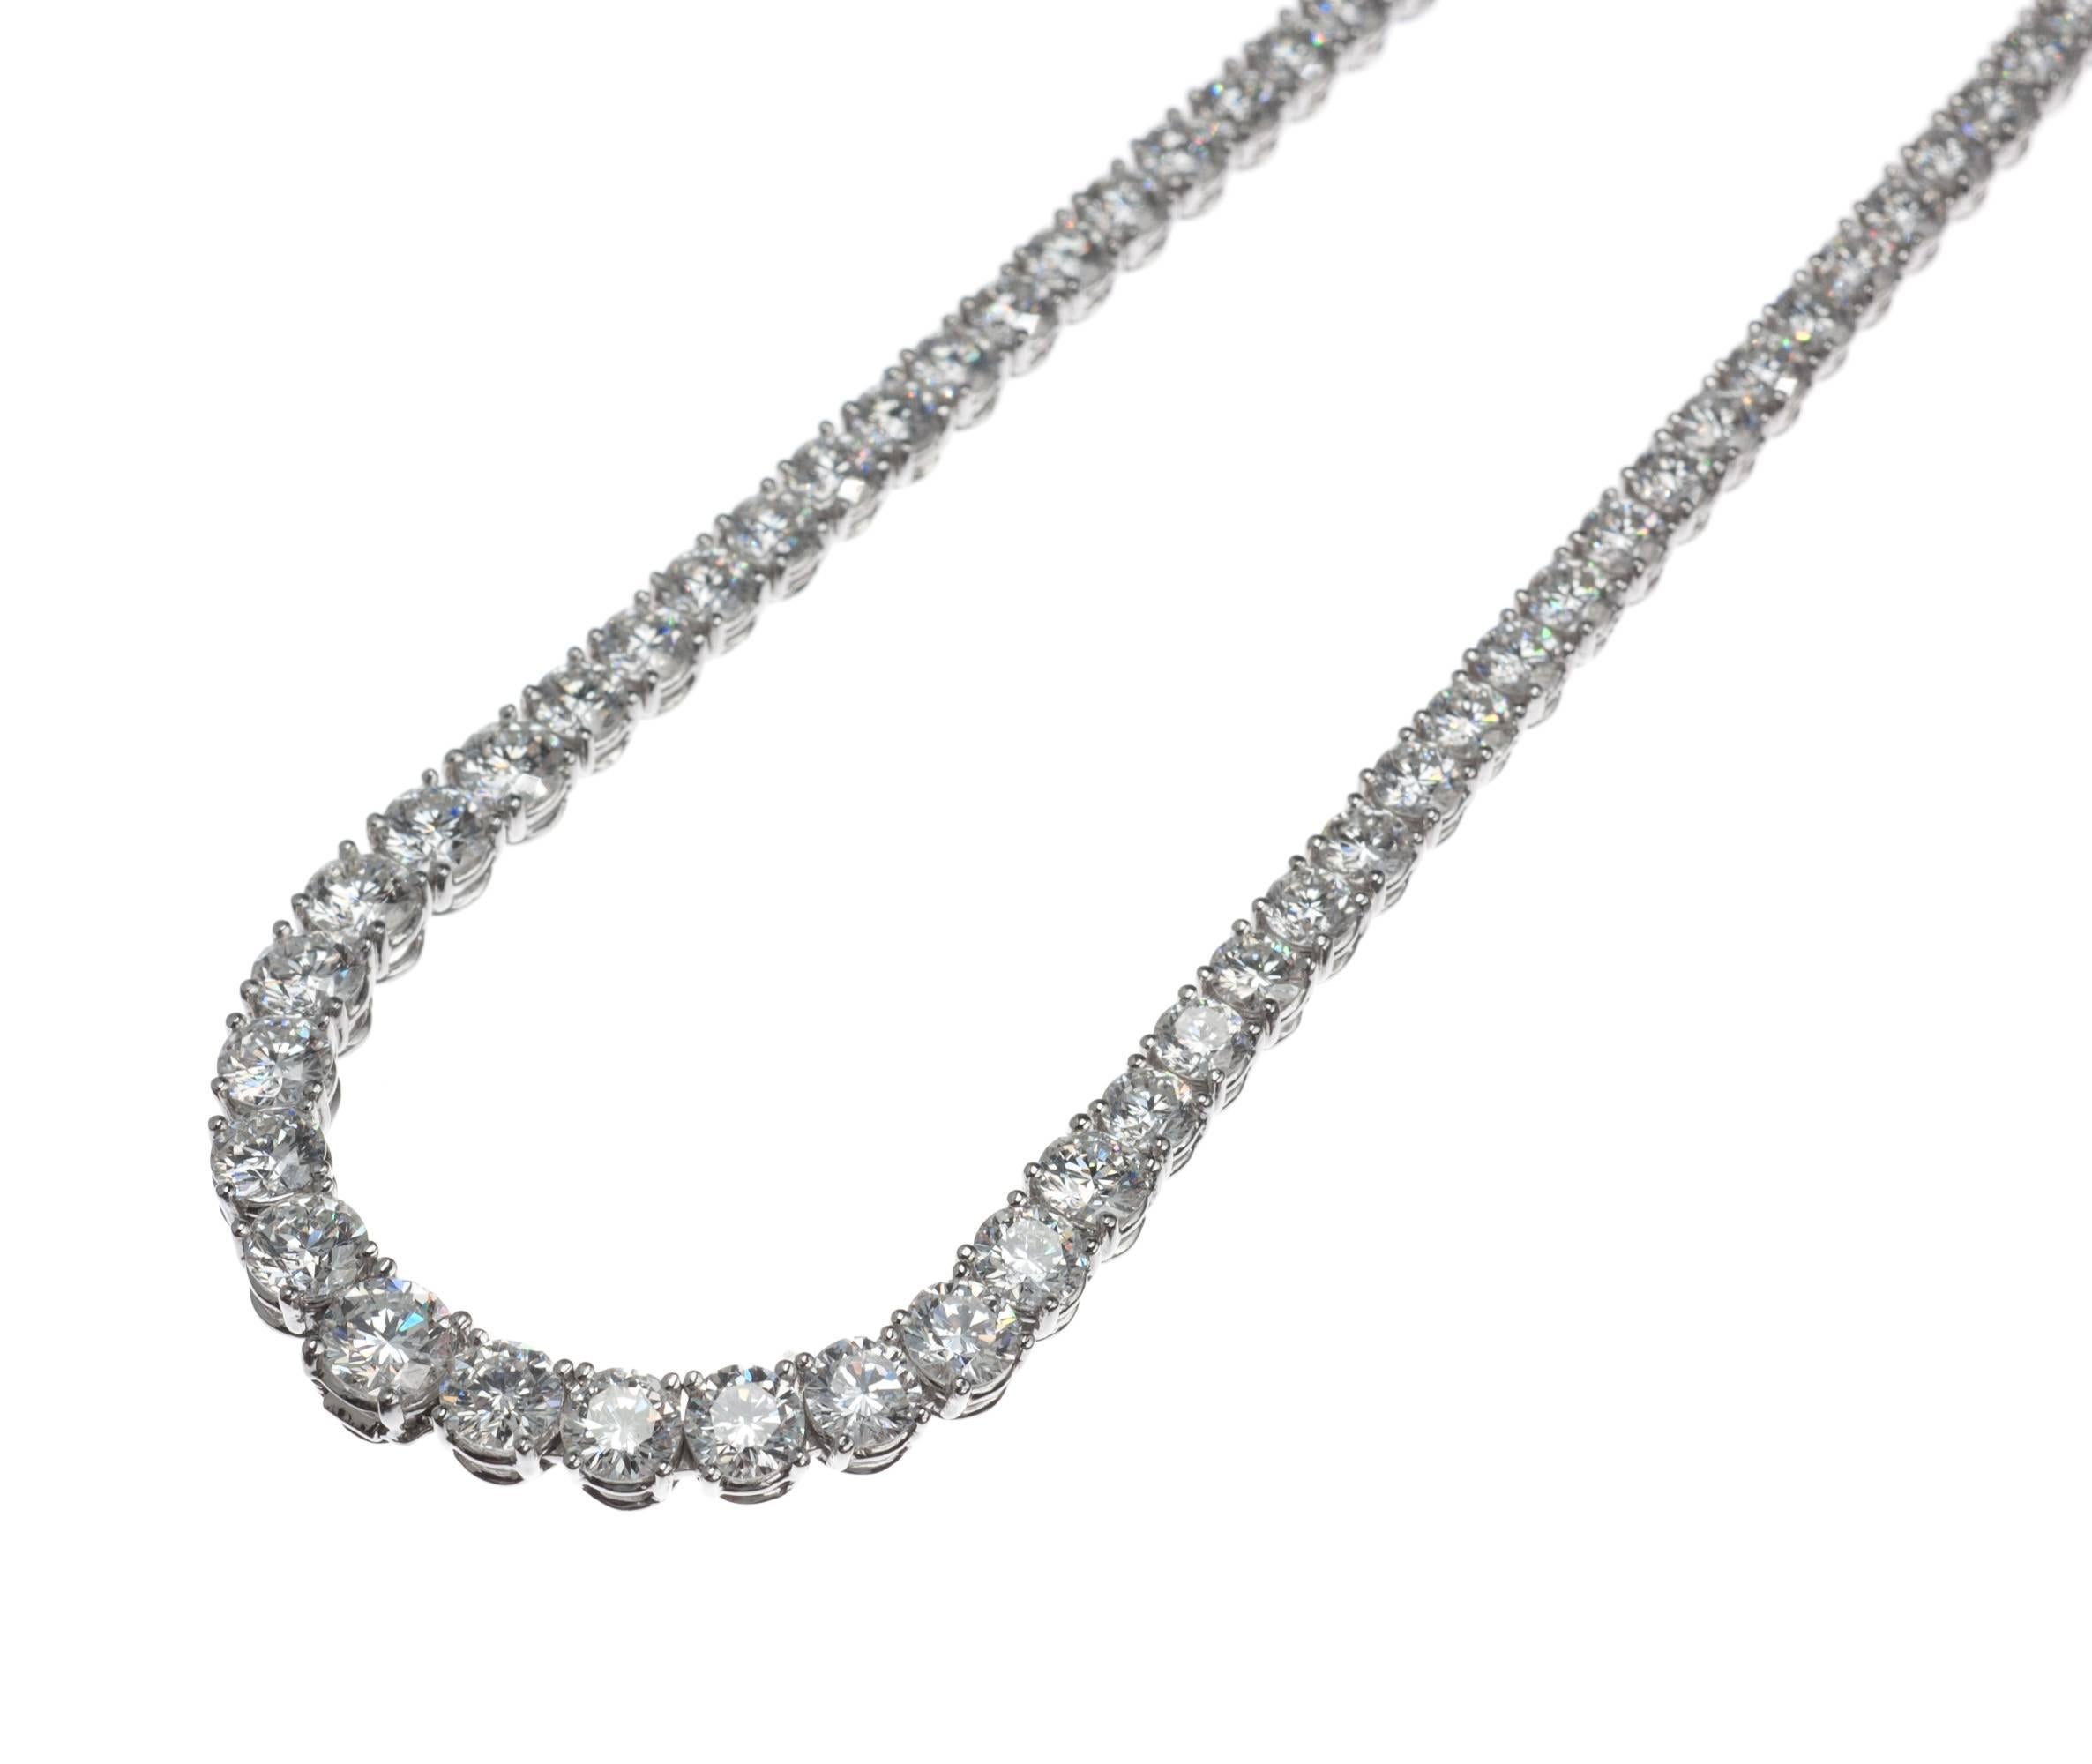 An elegant platinum riviera necklace set with 139 brilliant-cut round diamonds, approx. 11.98ctw. of G-H color and SI1-SI2 clarity, tapering from approx. .05ct. diamonds near the clasp to an approx. .32ct. diamond at center. Discretely hidden away